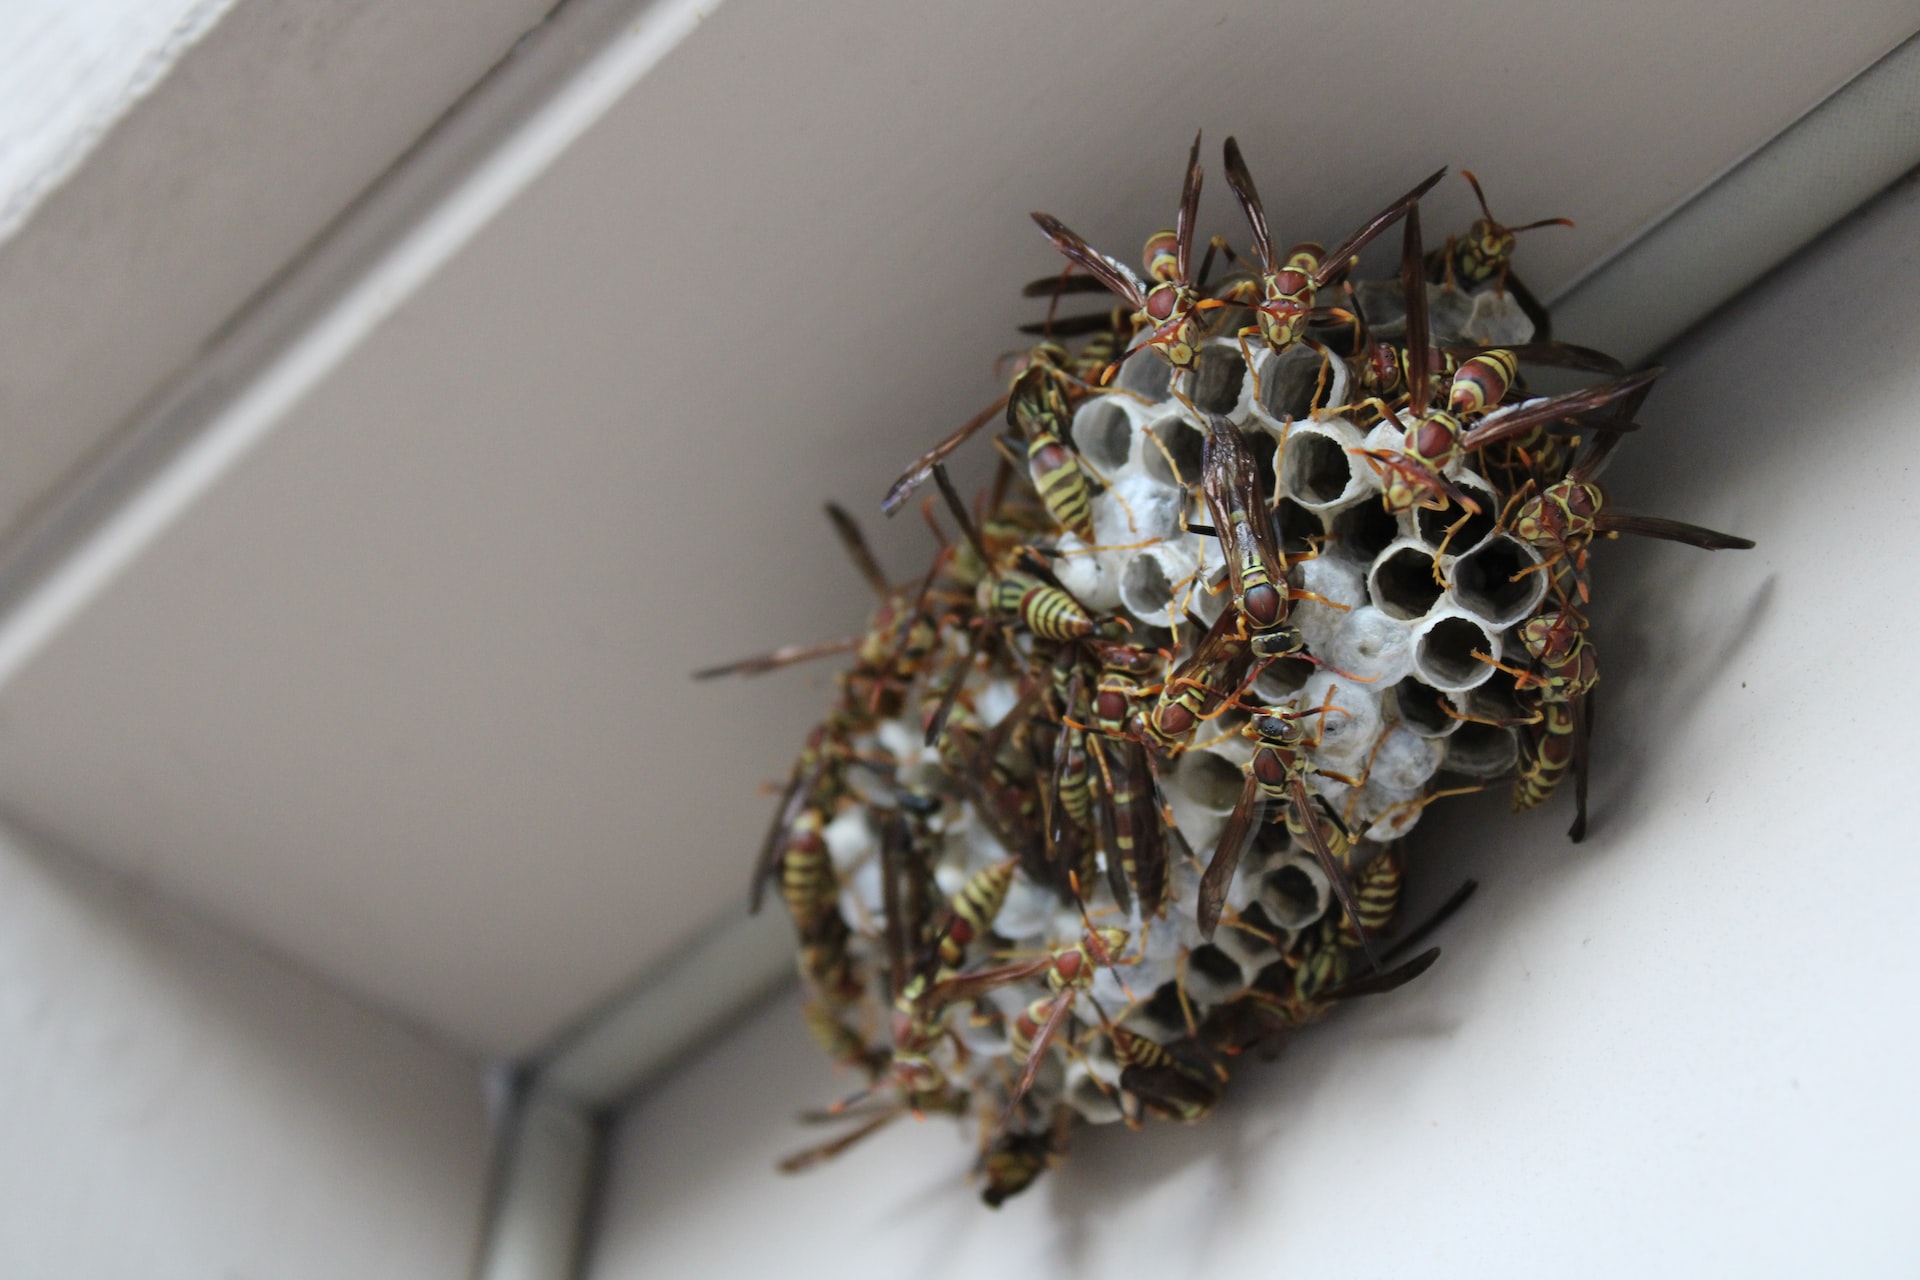 Frequent Problems With Wasps? Here's How to Protect Your House